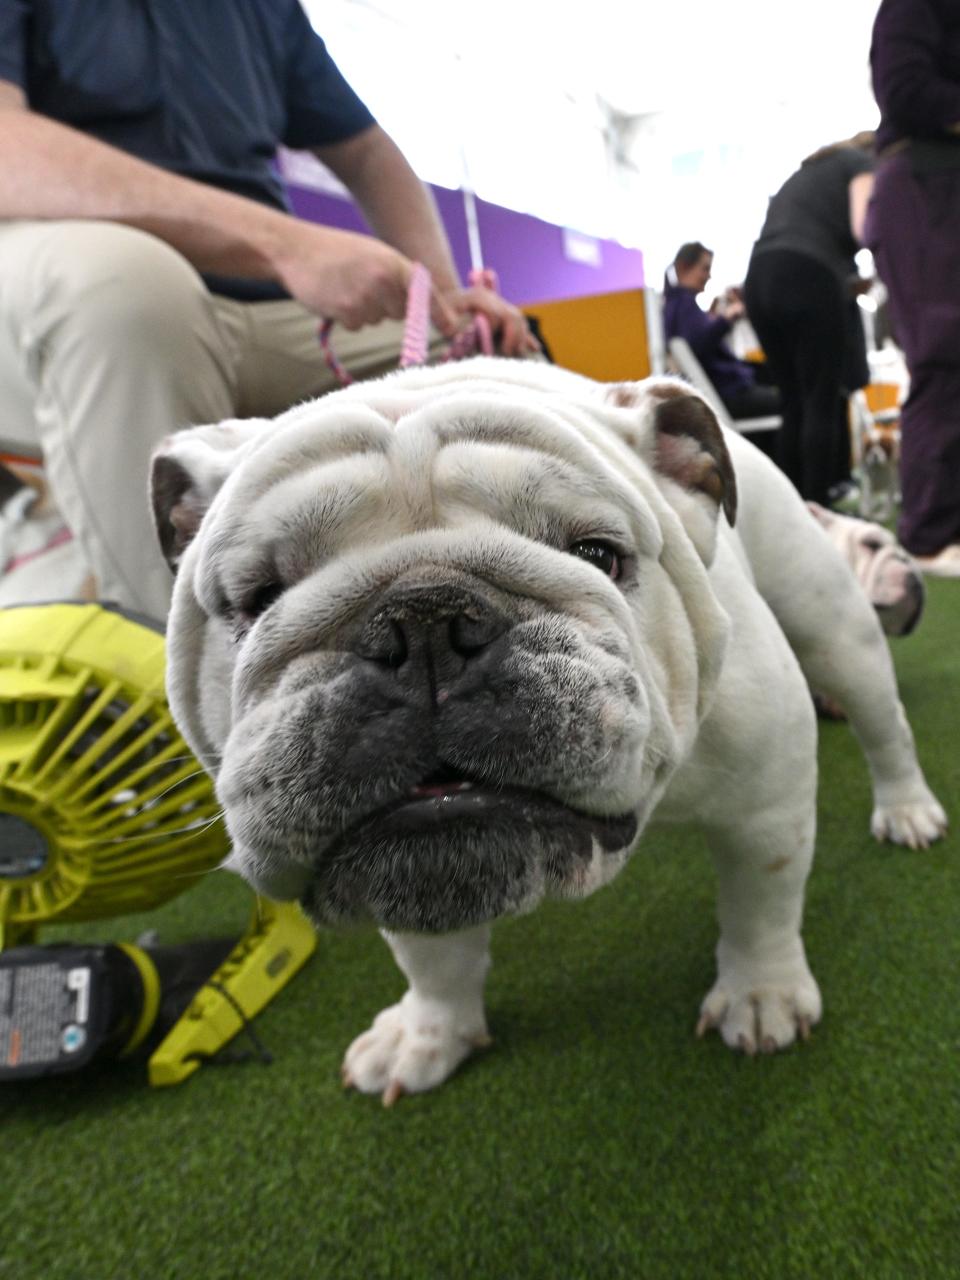 A dog is seen during the 147th Annual Westminster Kennel Club Dog Show Presented by Purina Pro Plan - Canine Celebration Day at Arthur Ashe Stadium on May 06, 2023 in New York City.